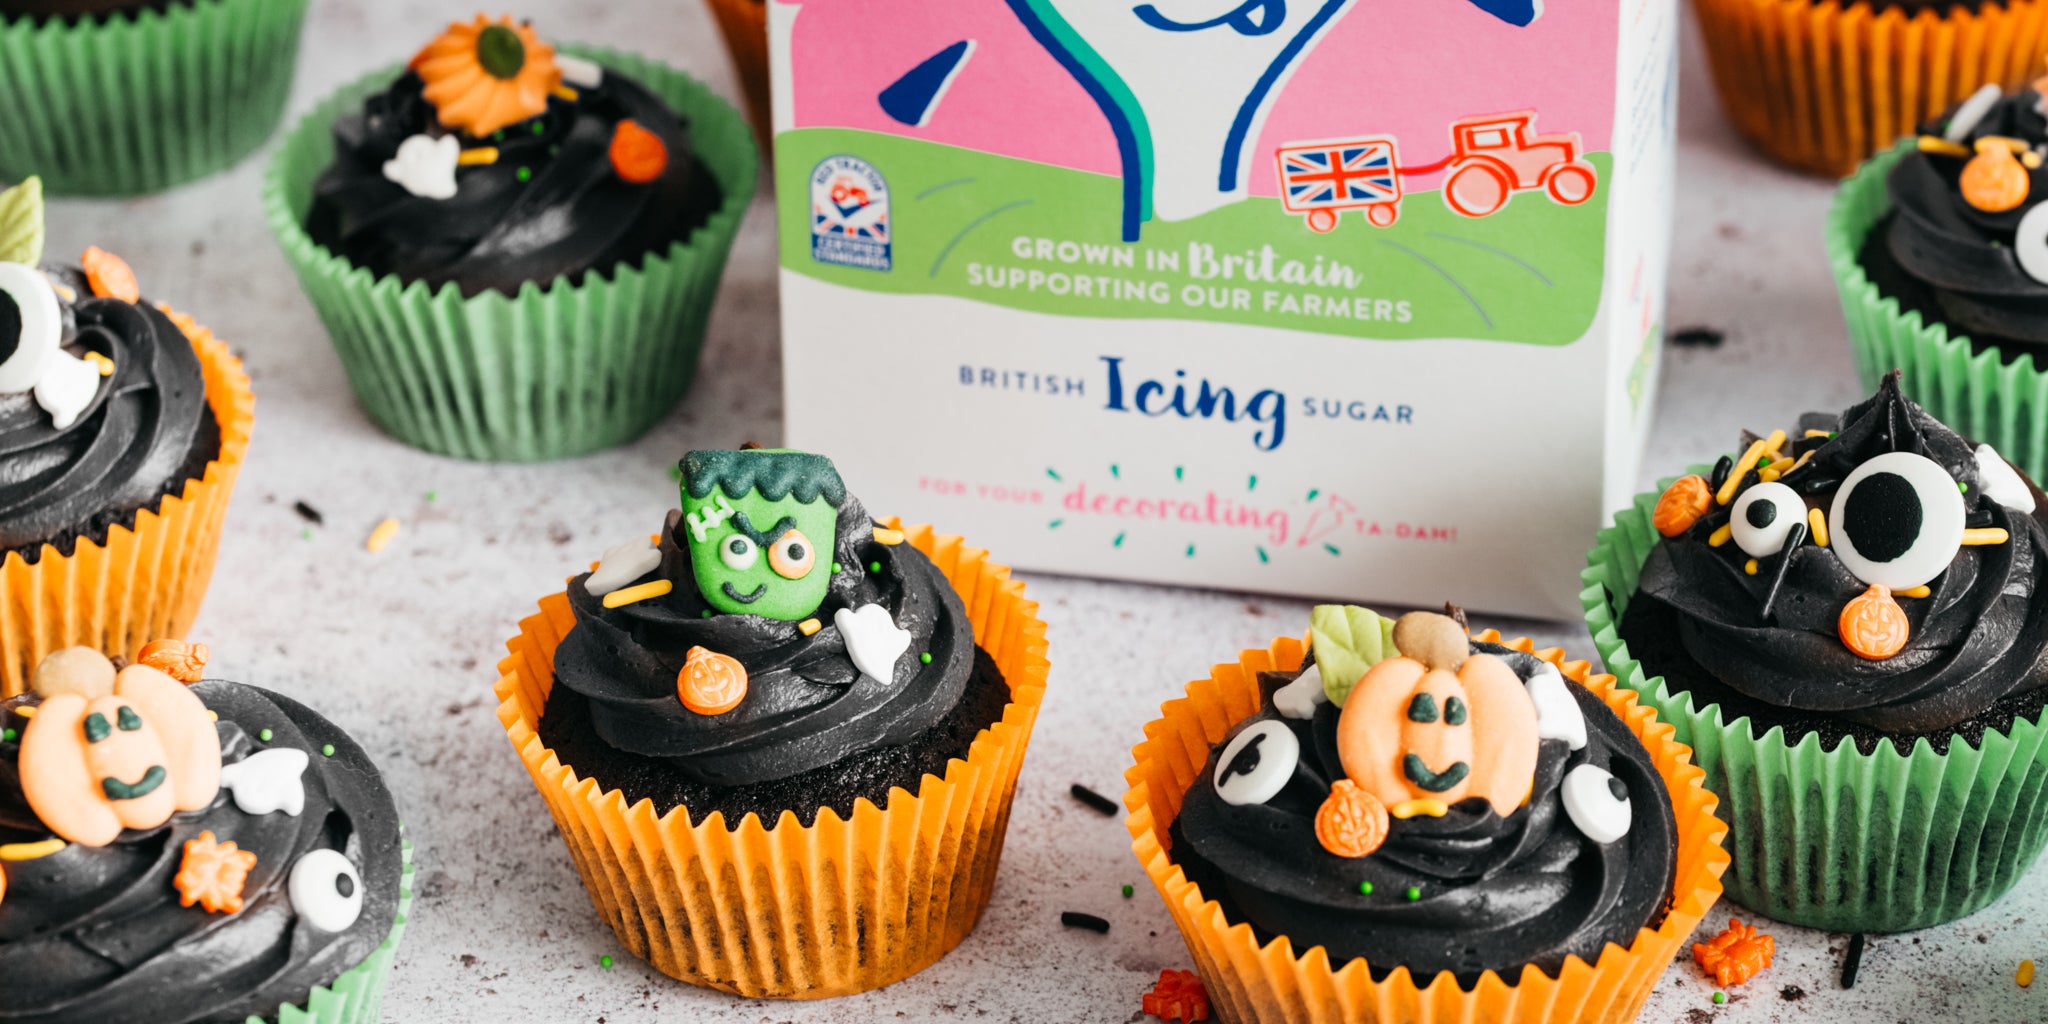 Black halloween cupcakes with icing sugar pack